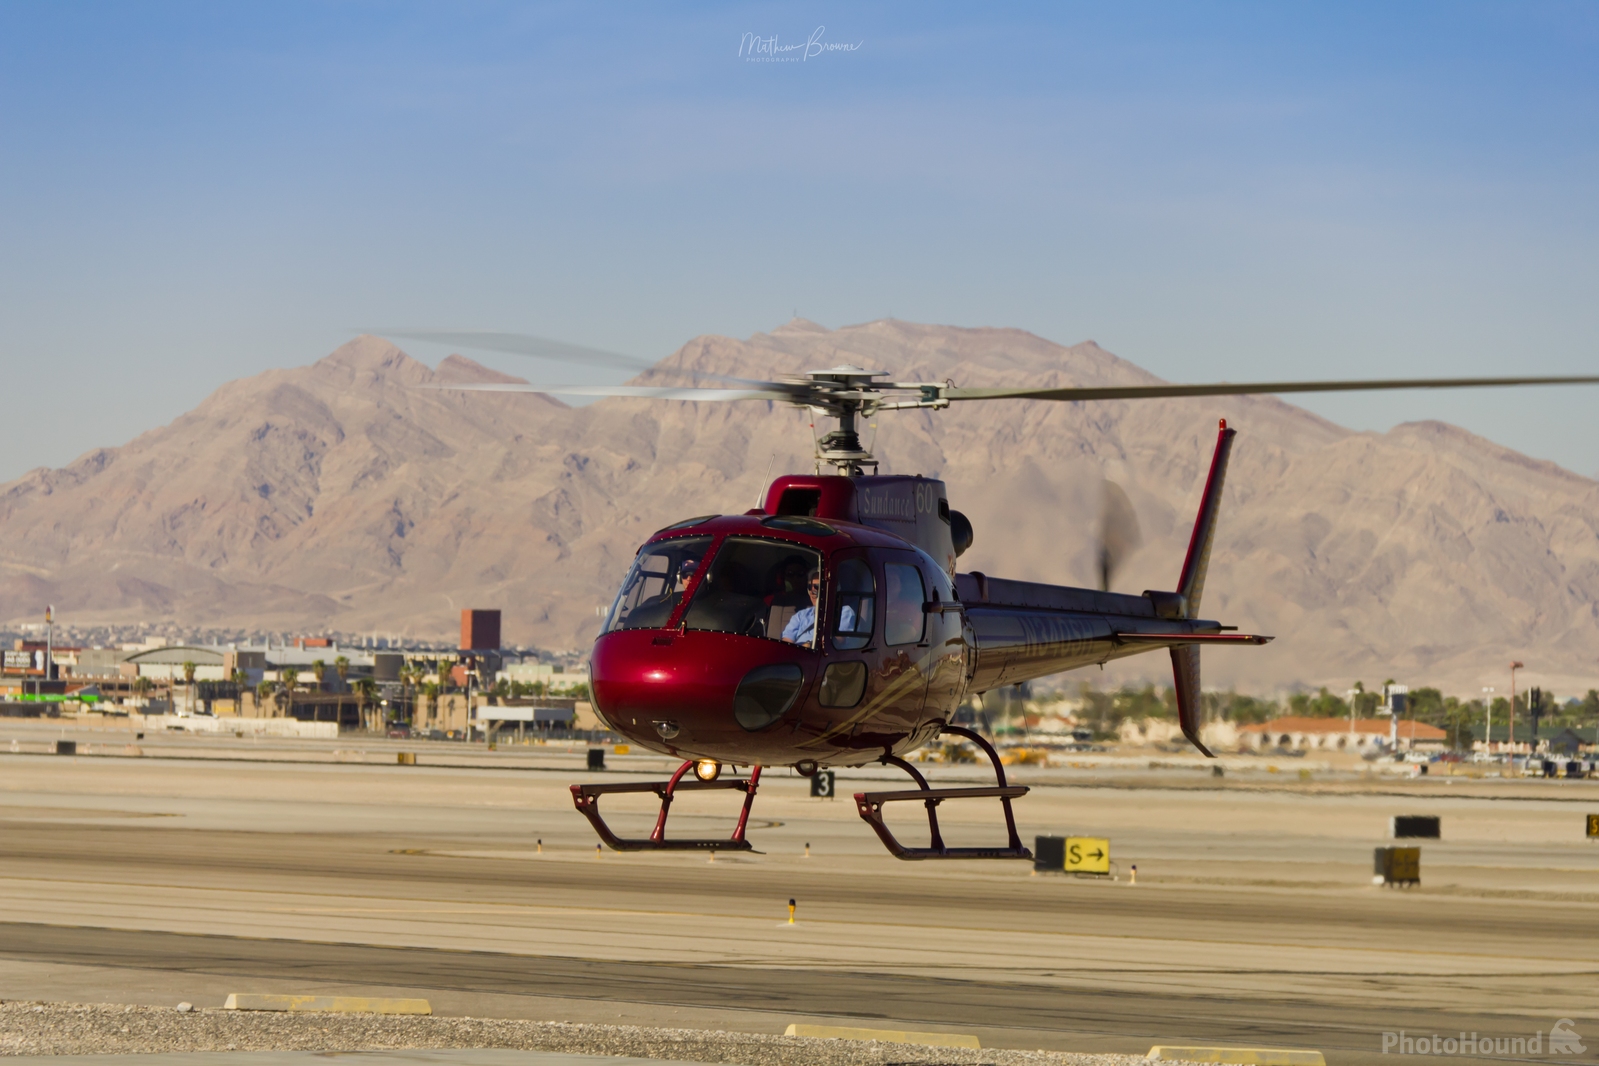 Image of Las Vegas Helicopter Tours by Mathew Browne